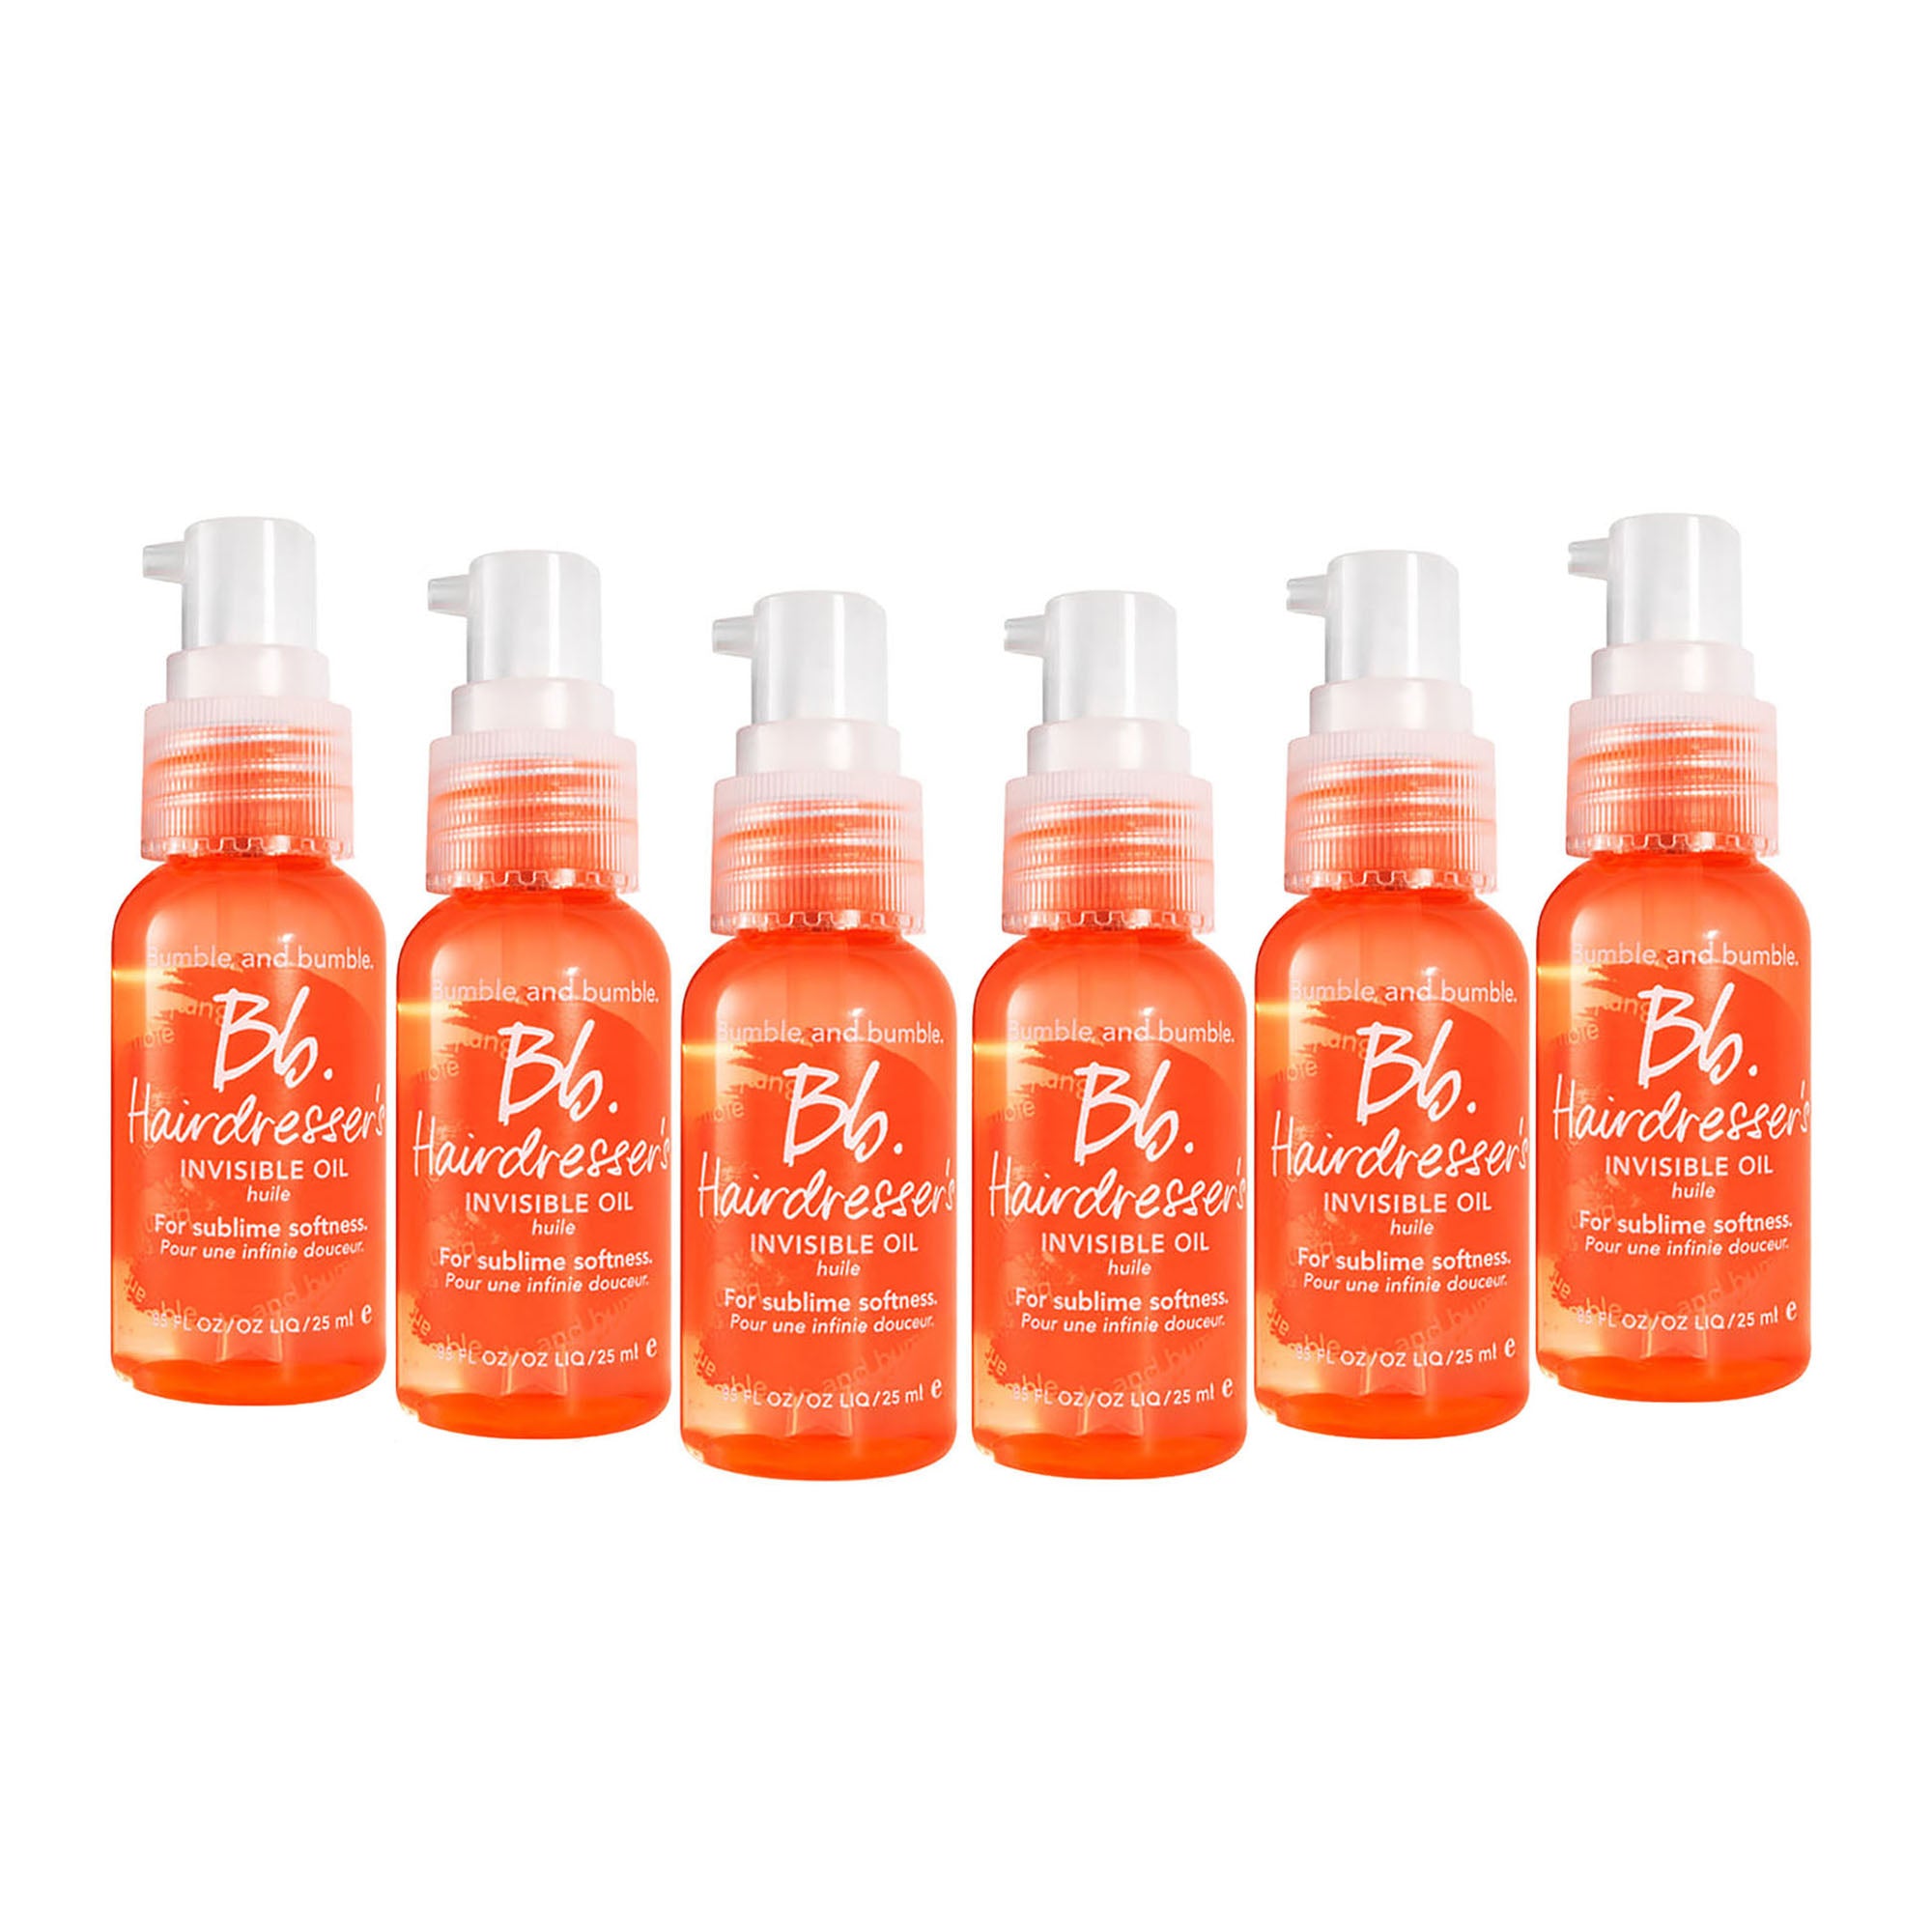 Bumble and bumble Hairdresser's Invisible Oil 0.8oz - 6 Pack ($144 Value) / 6PK